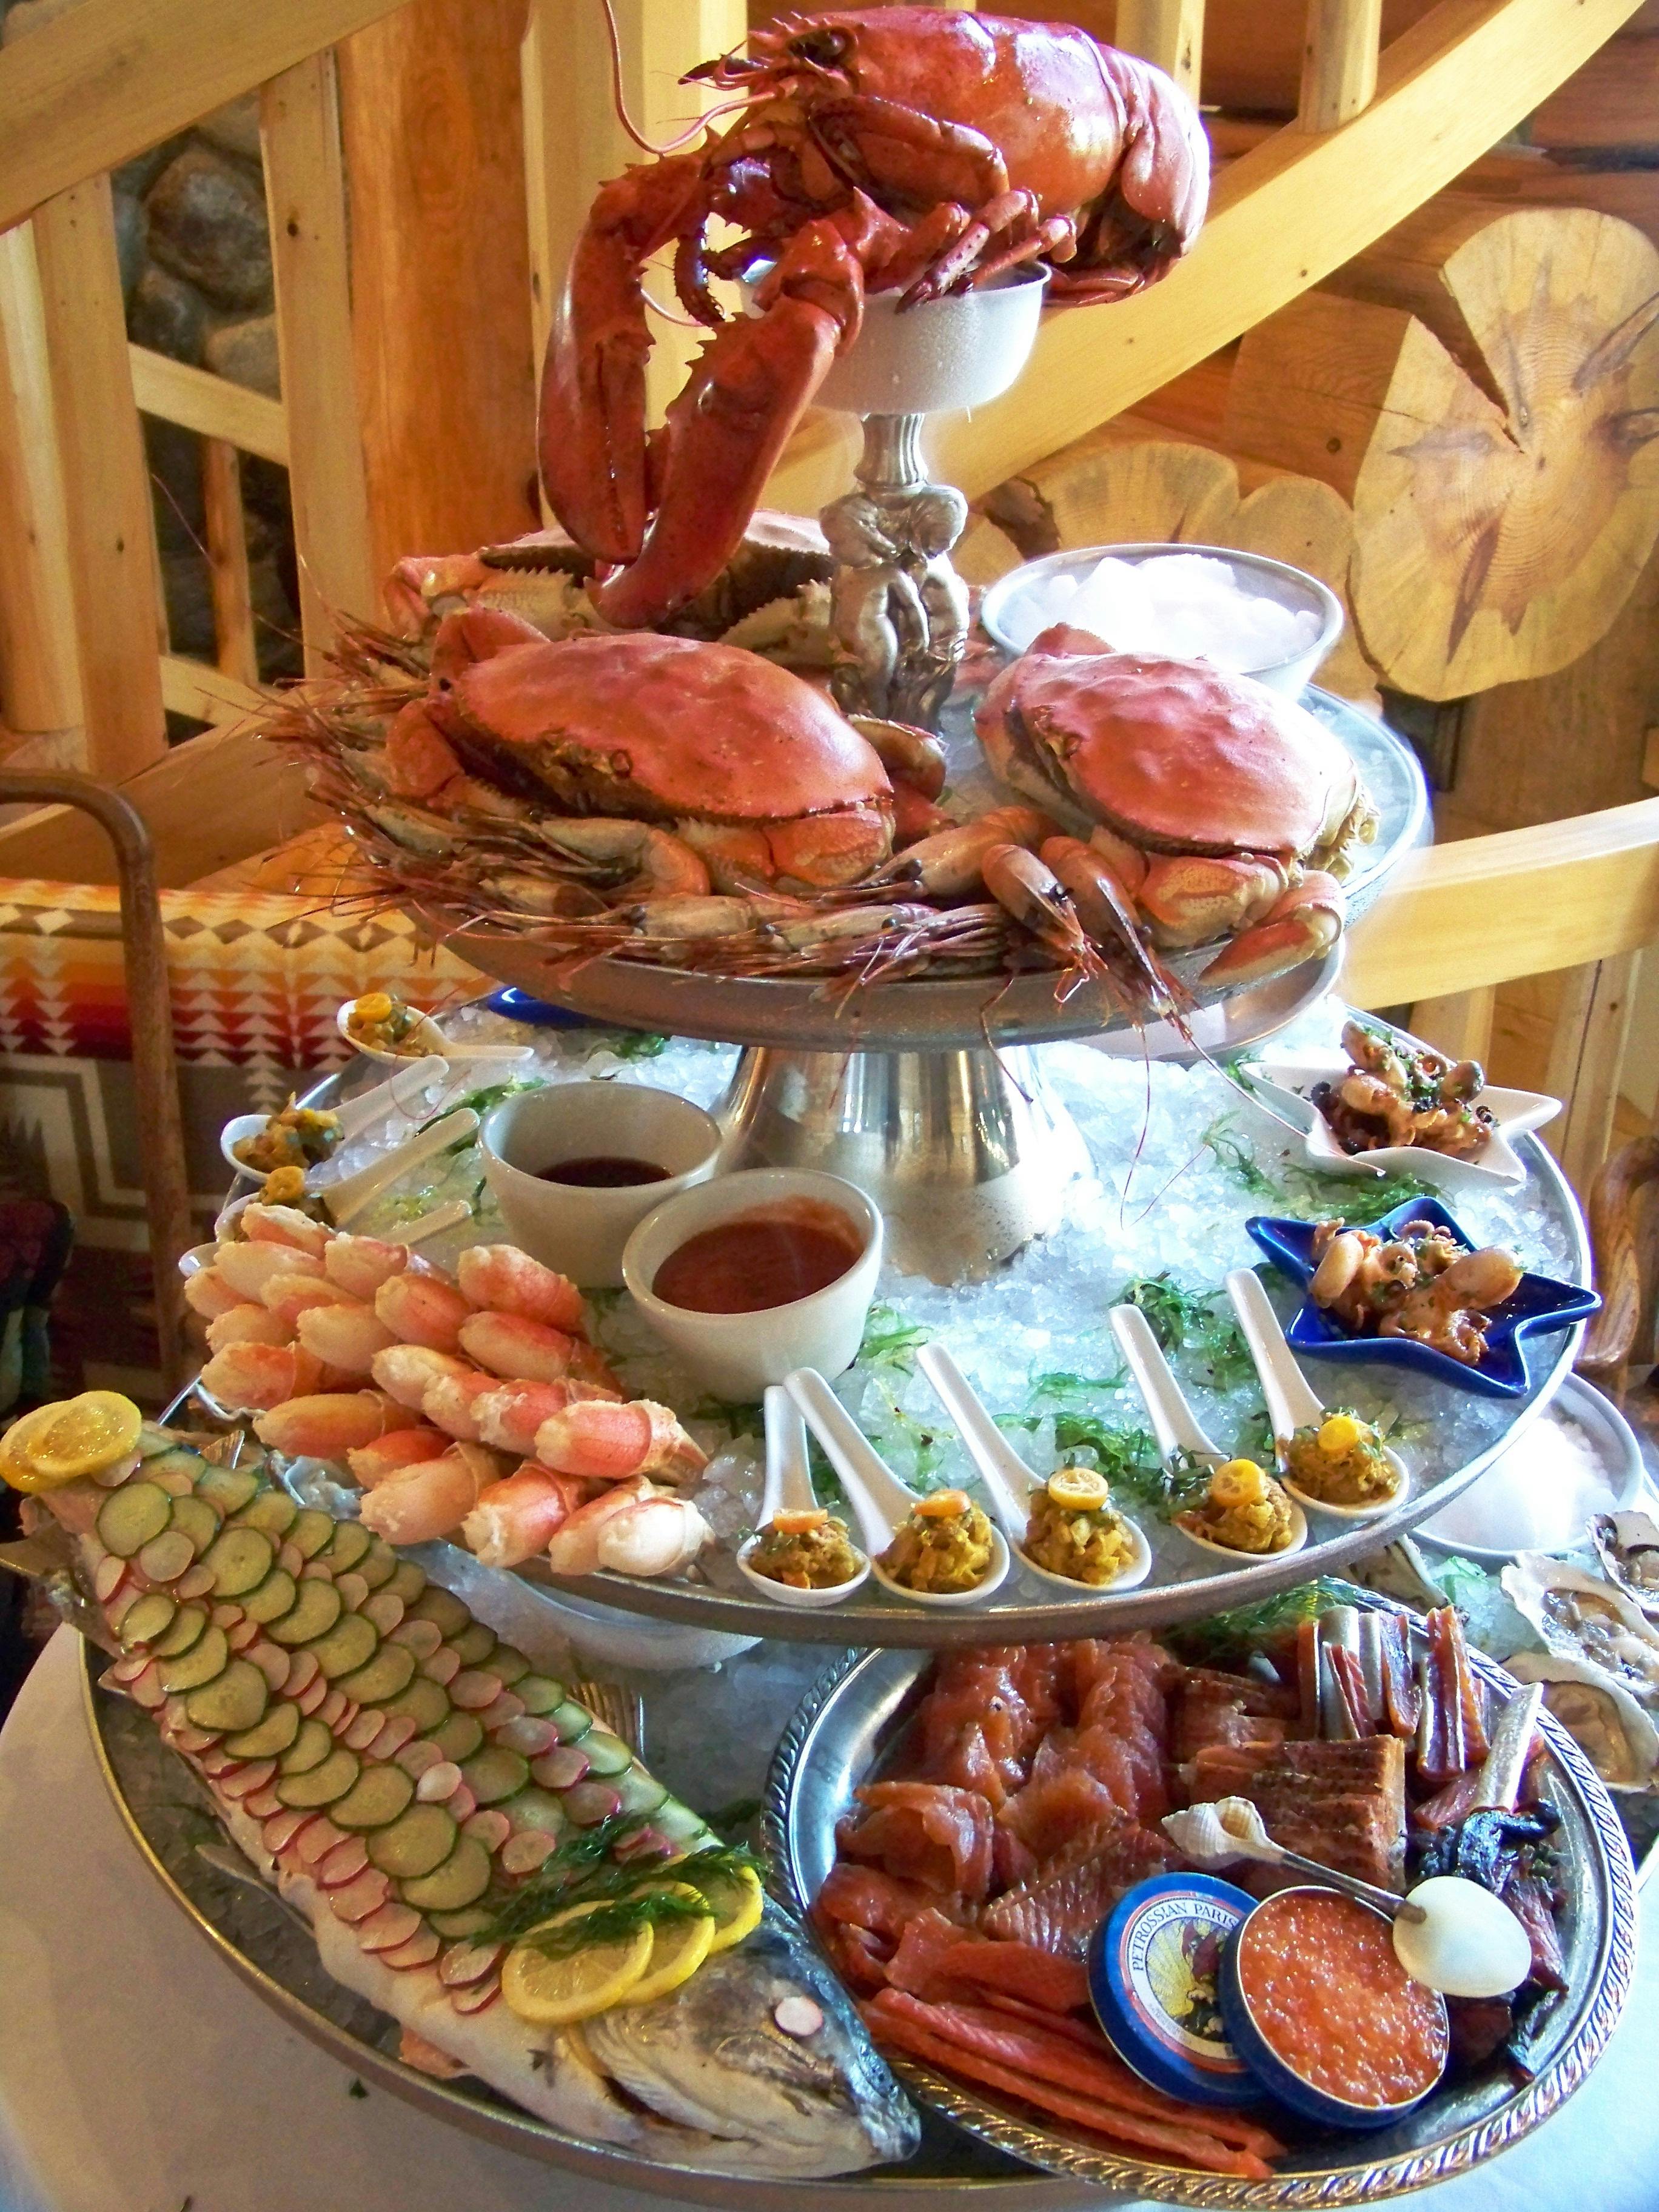 Our Seafood tower showcasing all Alaskan seafood